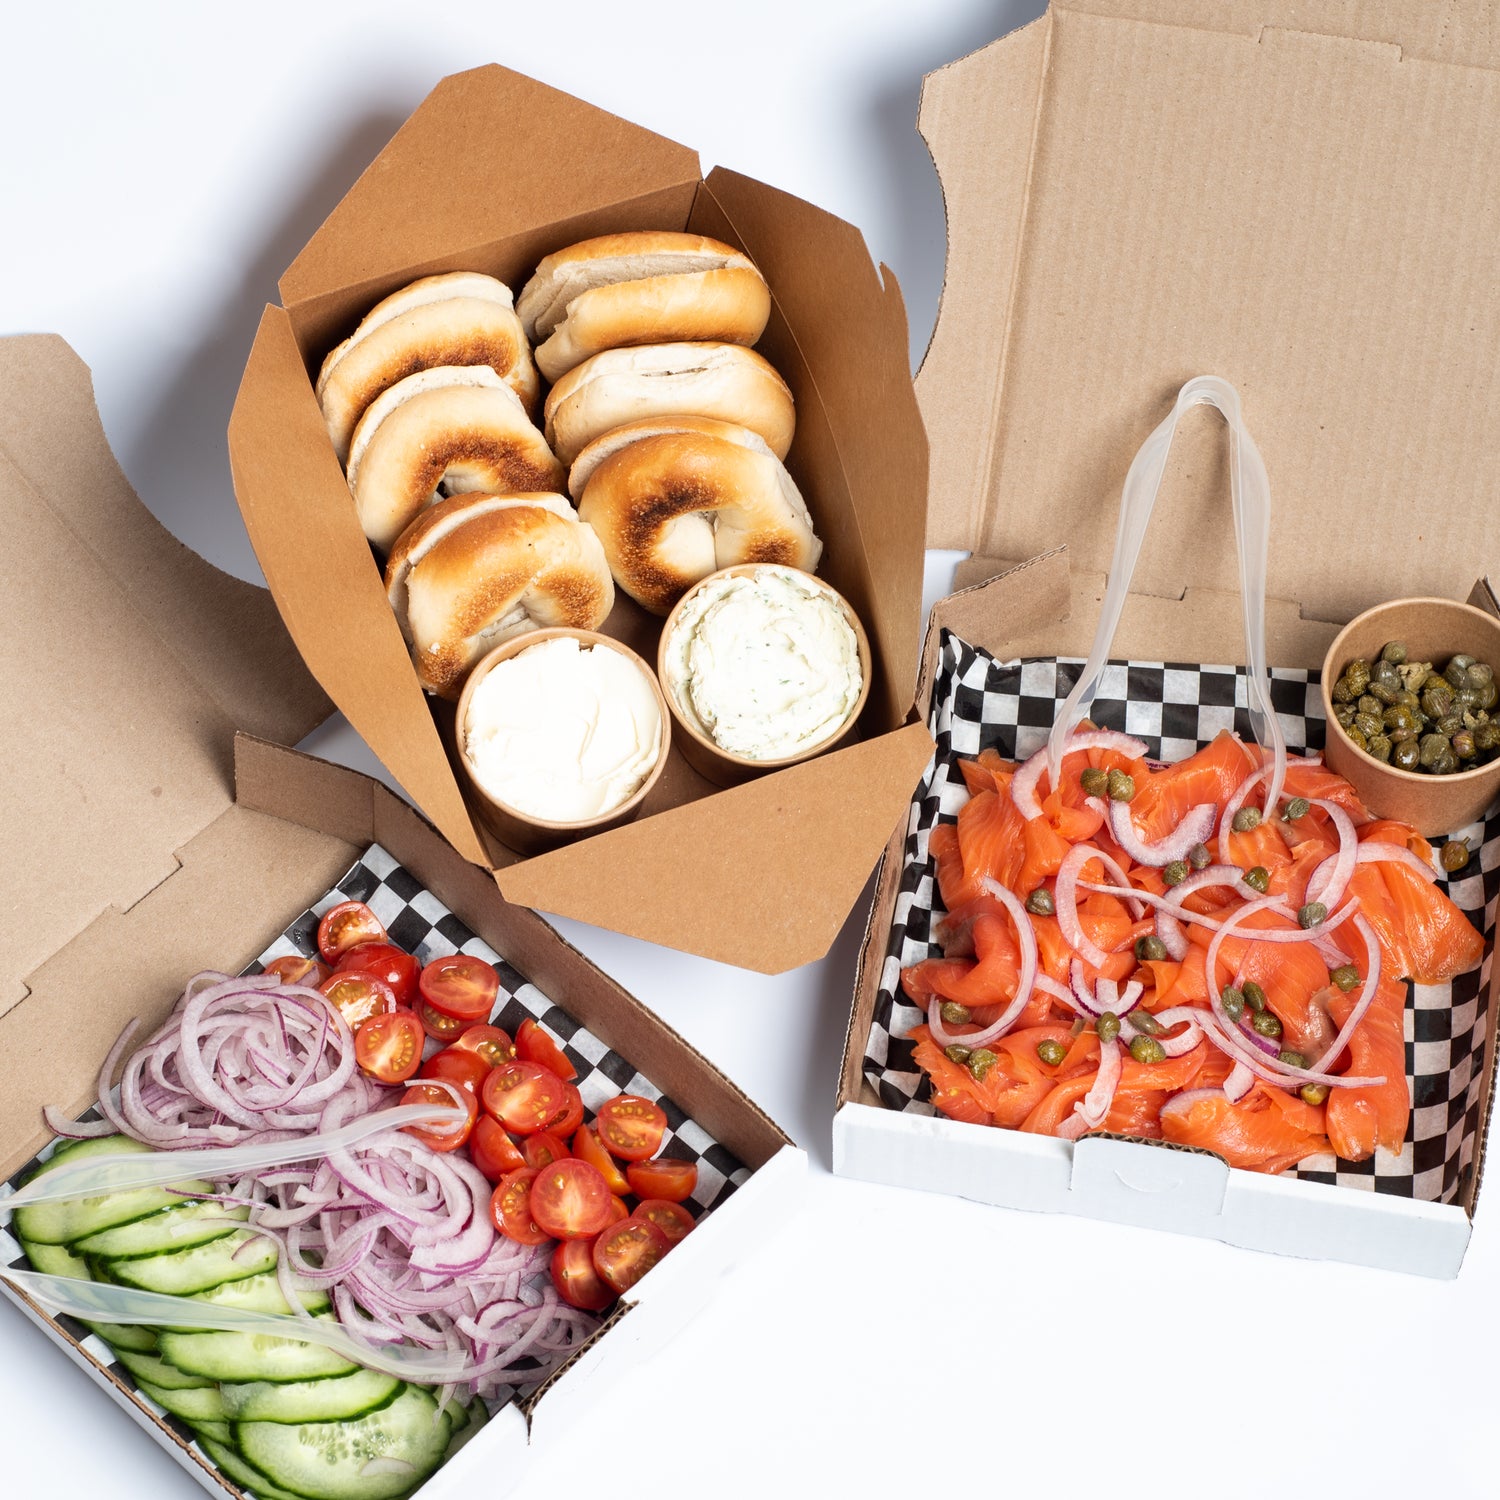 Cheese Platters, Crudites, Snack Boxes, and more